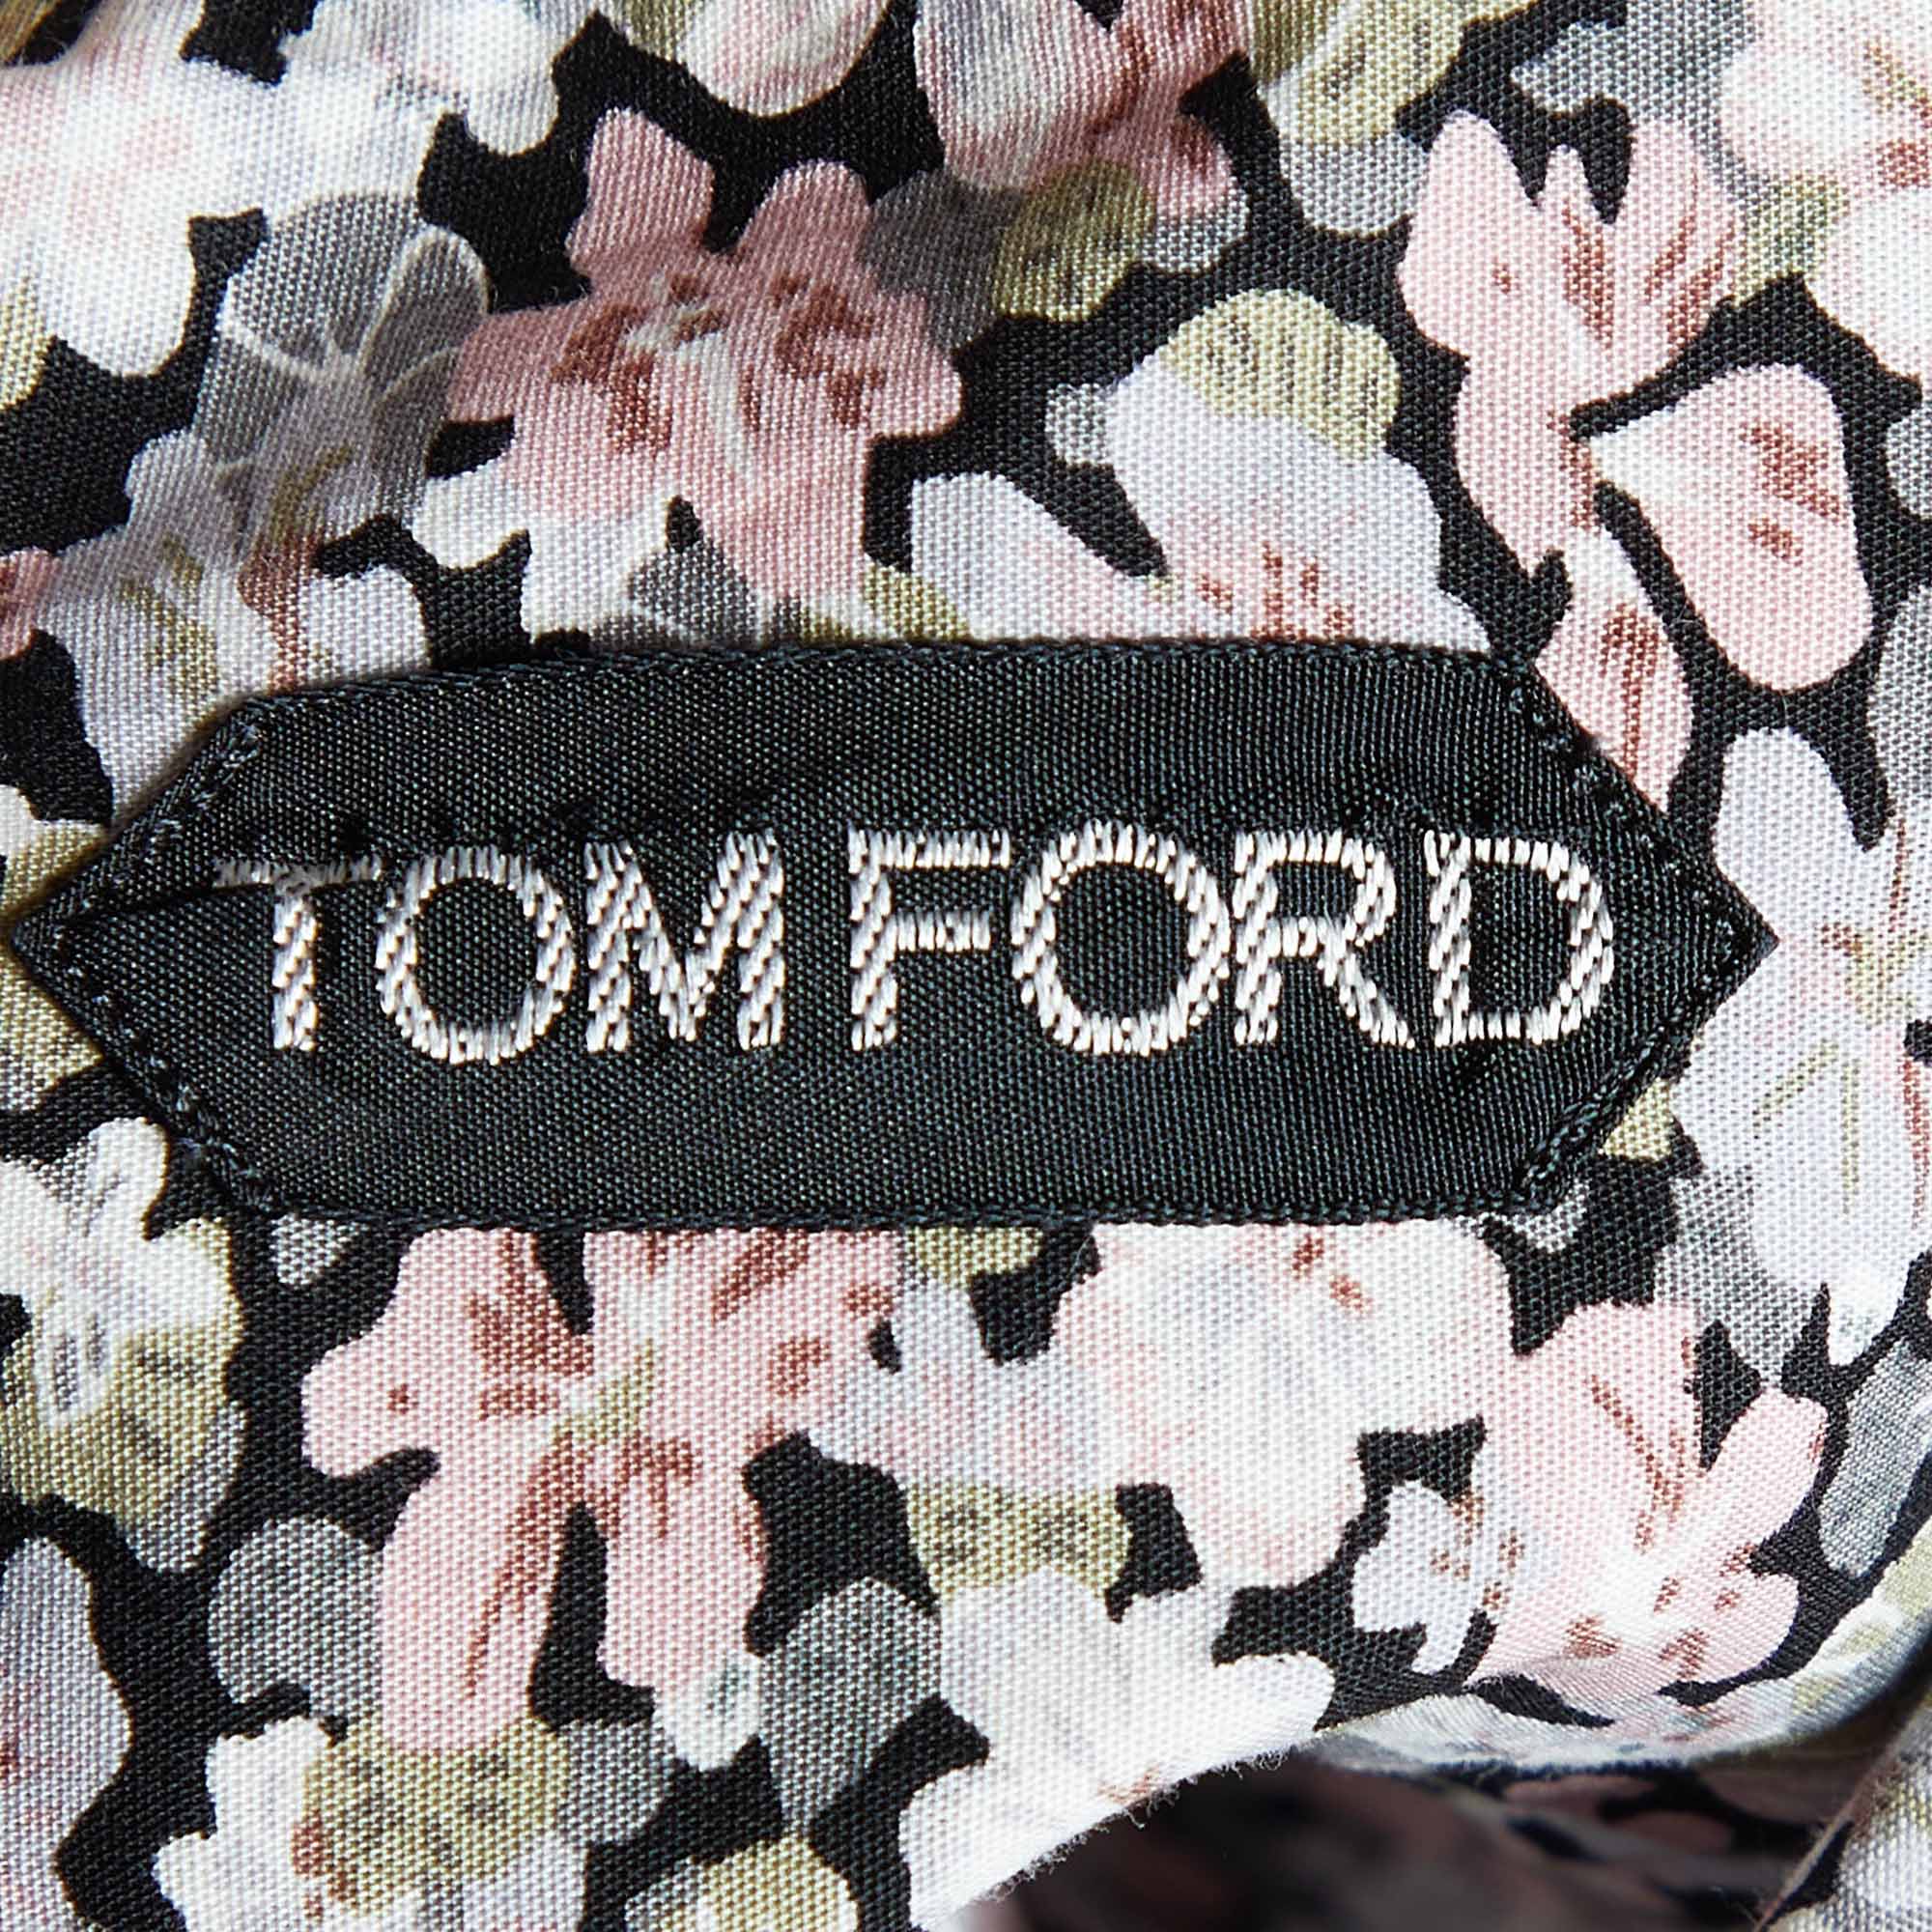 Tom Ford Multicolor Floral Print Cotton Long Sleeve Shirt L